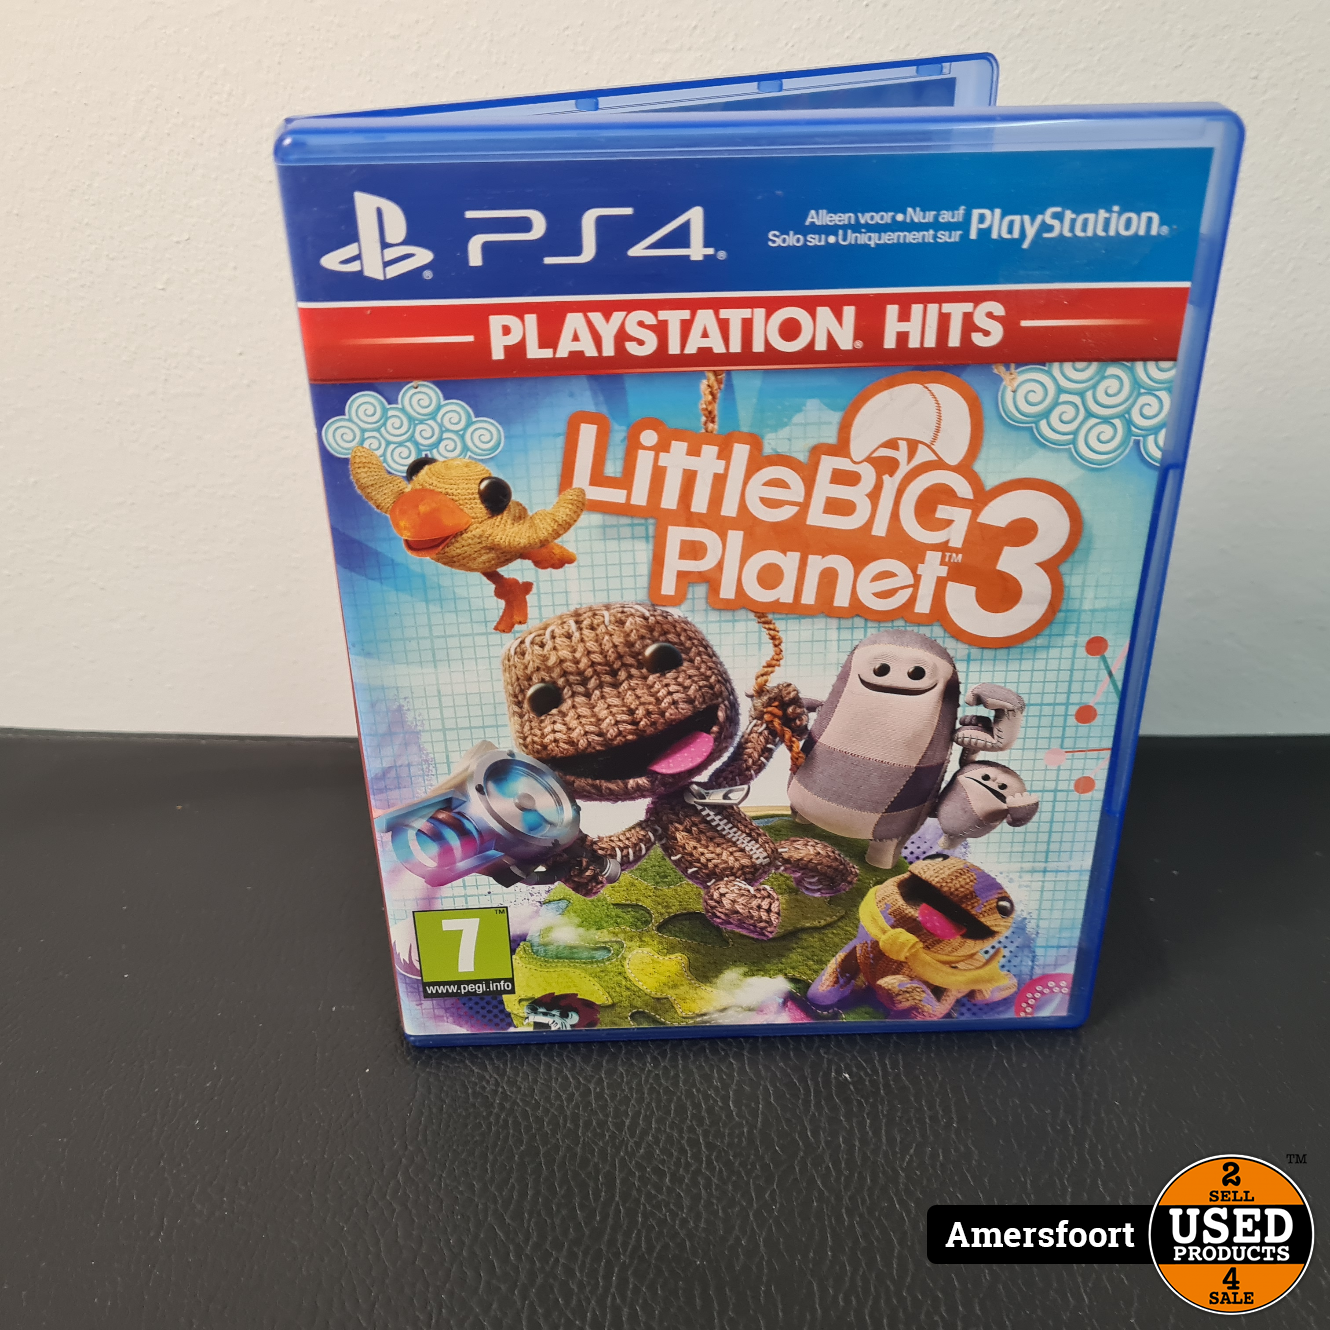 Little Big Planet 3 Playstation 4 - Used Products Amersfoort